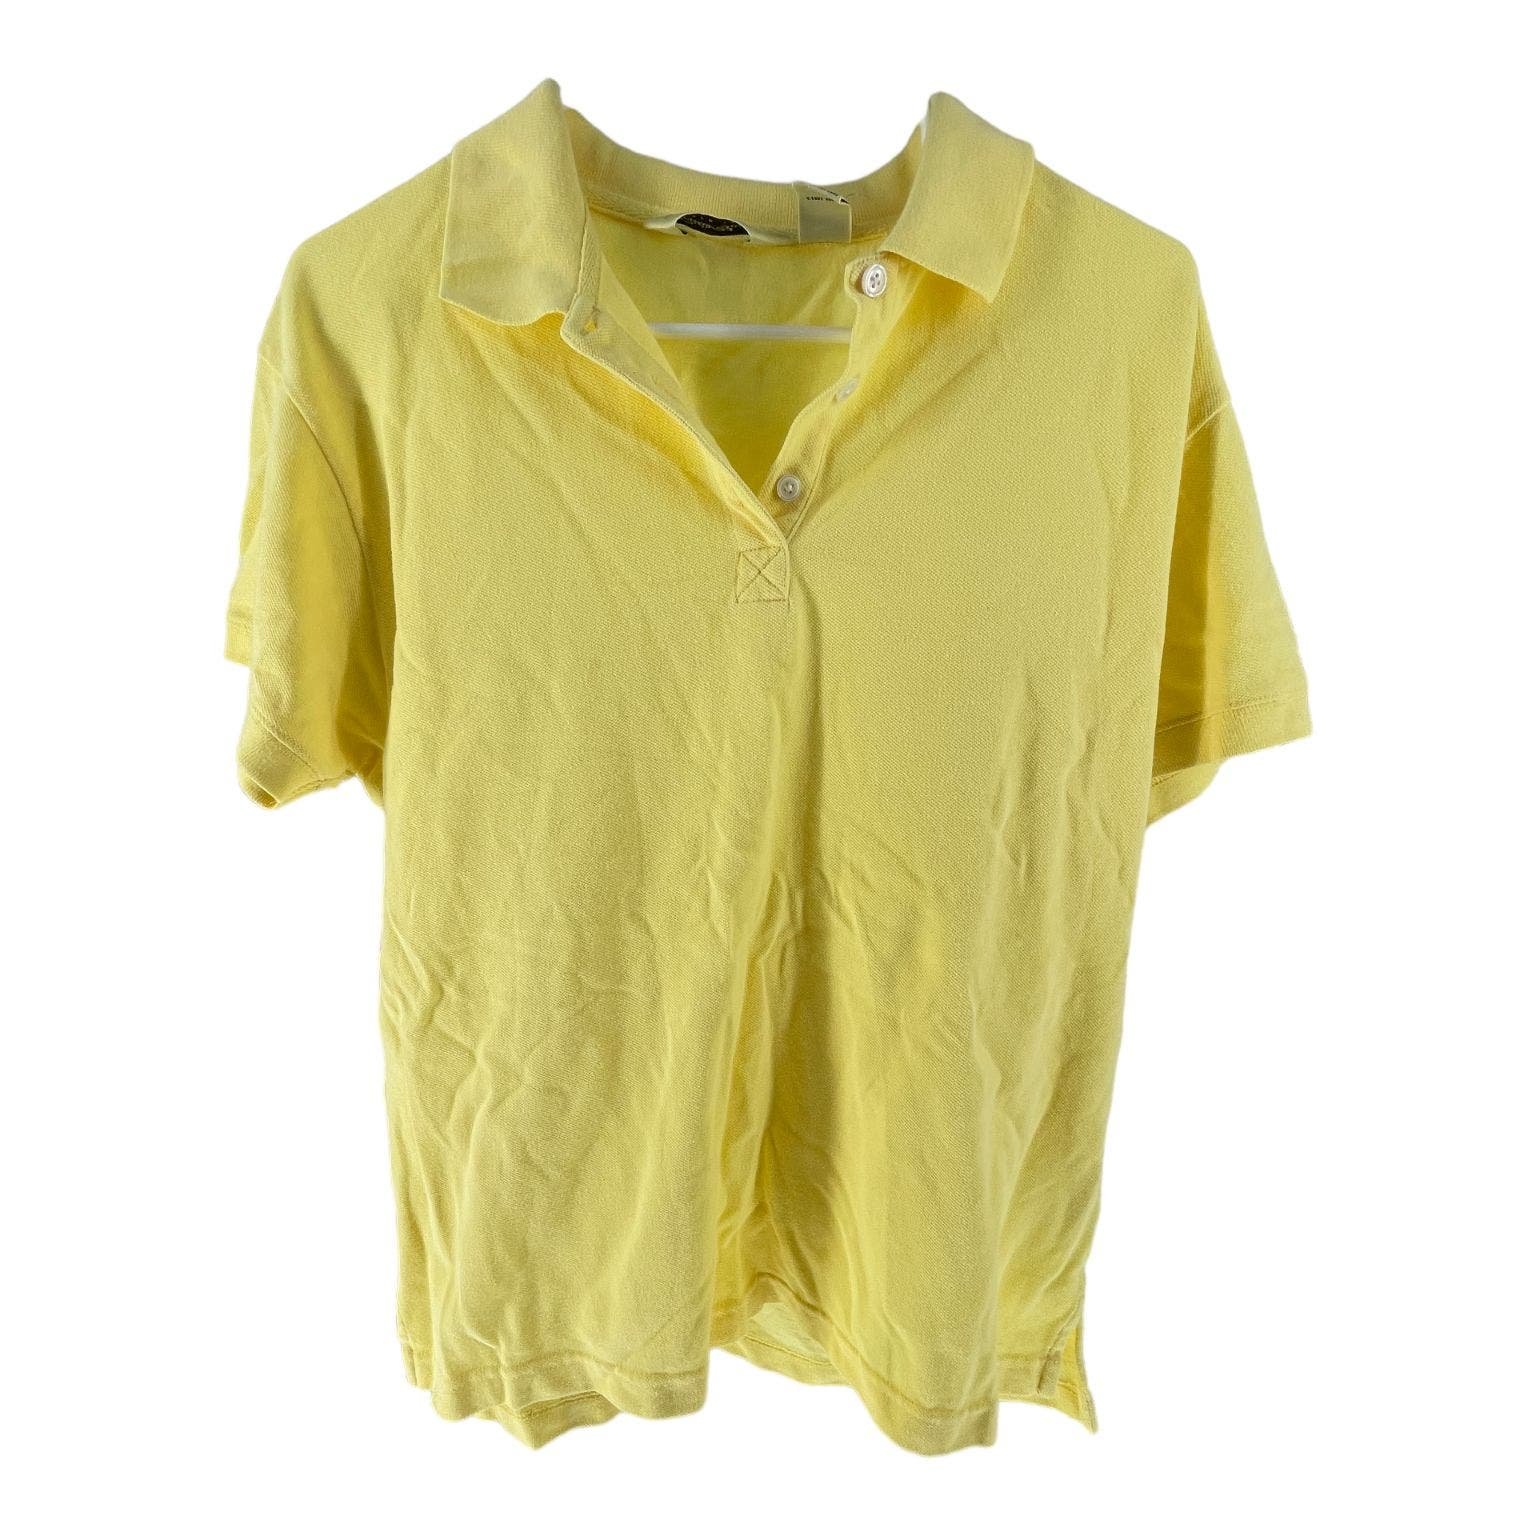 Comfortable Eddie Bauer Yellow Short Sleeve Cotton Collared Polo Shirt Women´s Size Large iGhEzrIPt Low Price